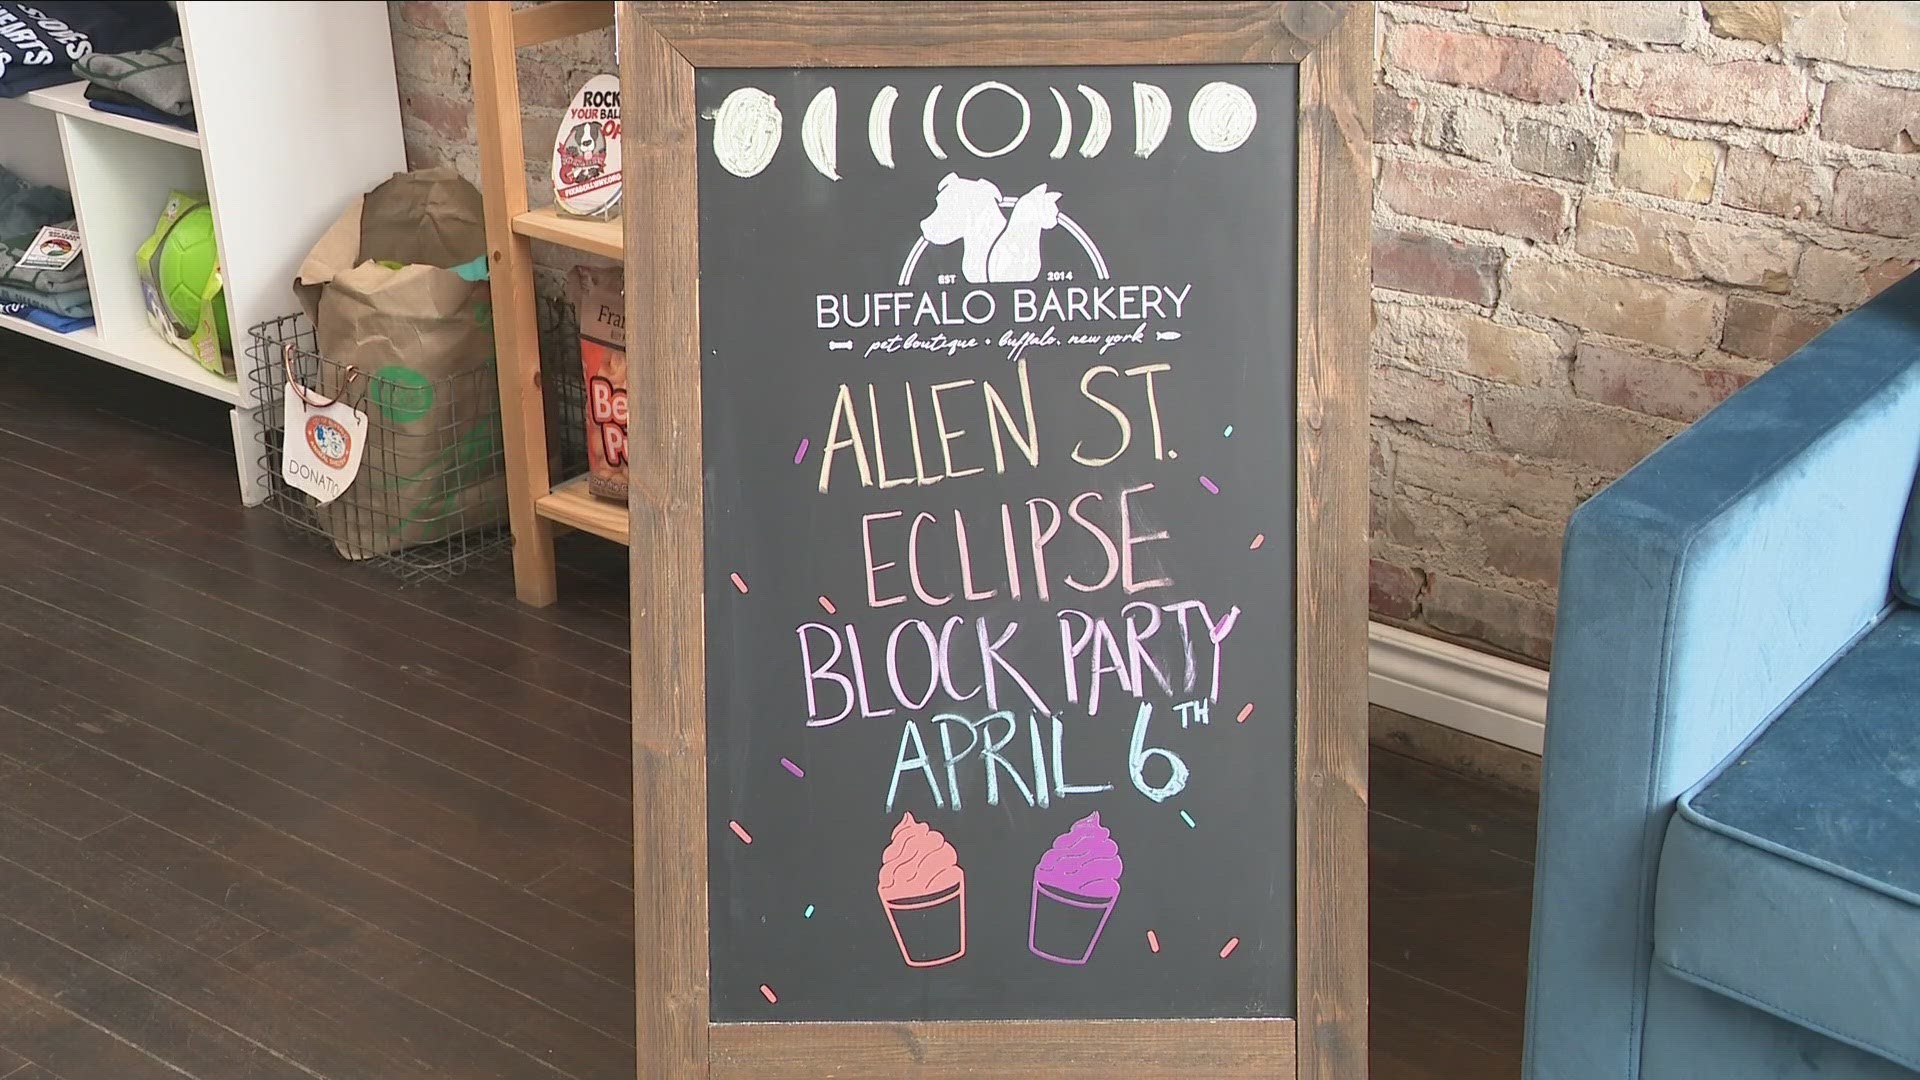 Buffalo Barkery to host pet-friendly eclipse themed fundraiser this weekend on Allen street